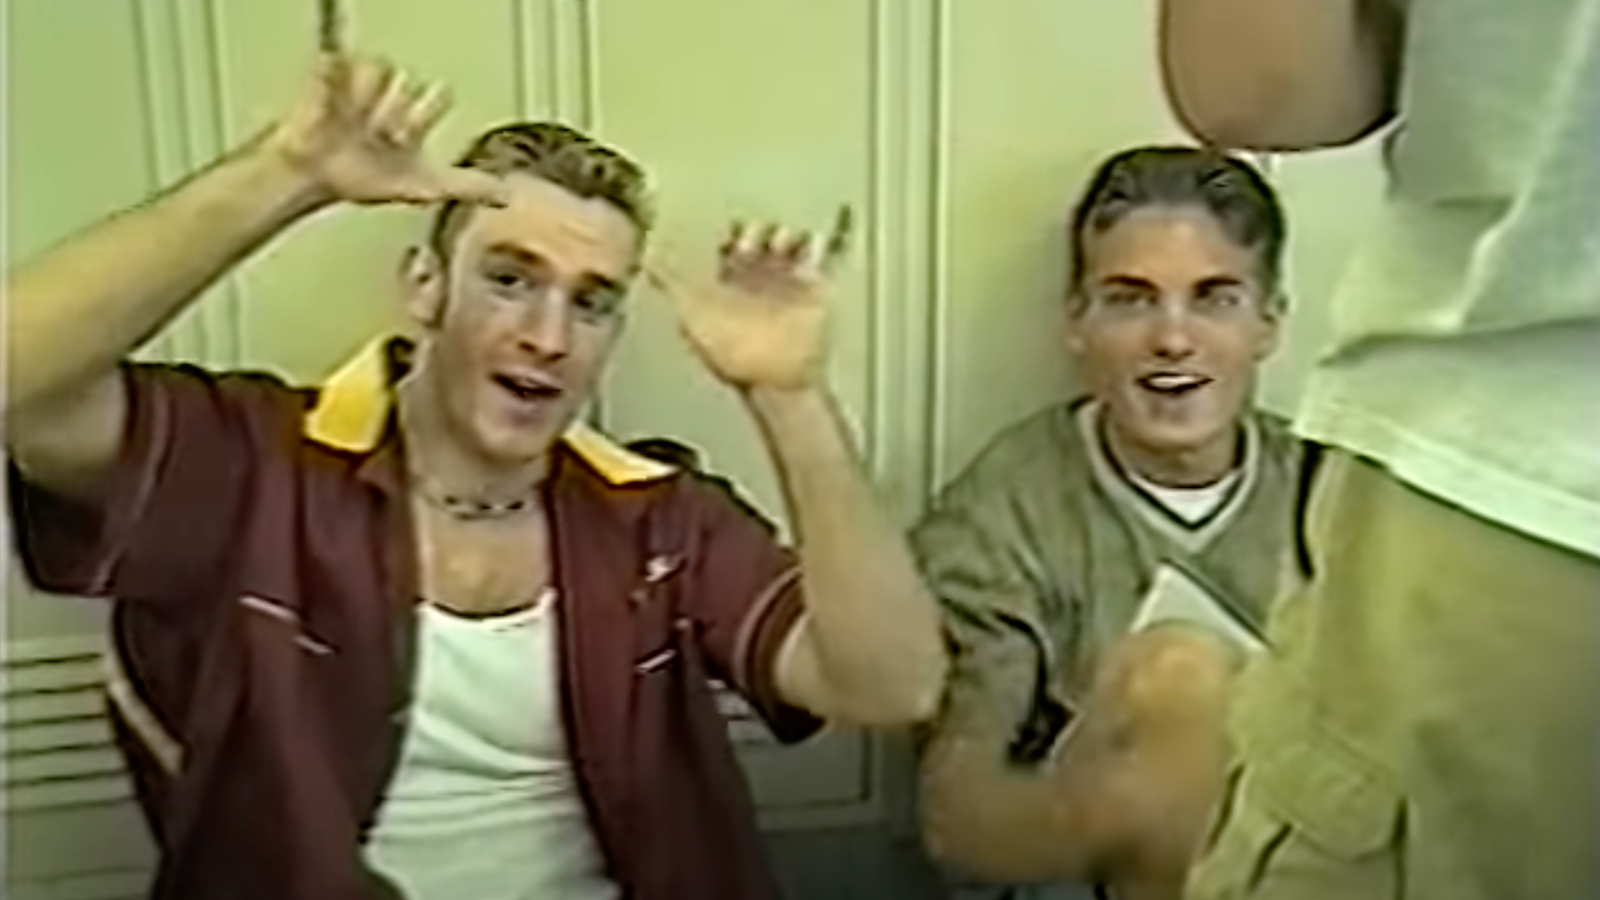 This 1990s Video Shows Us How Much Things Have Changed for Students